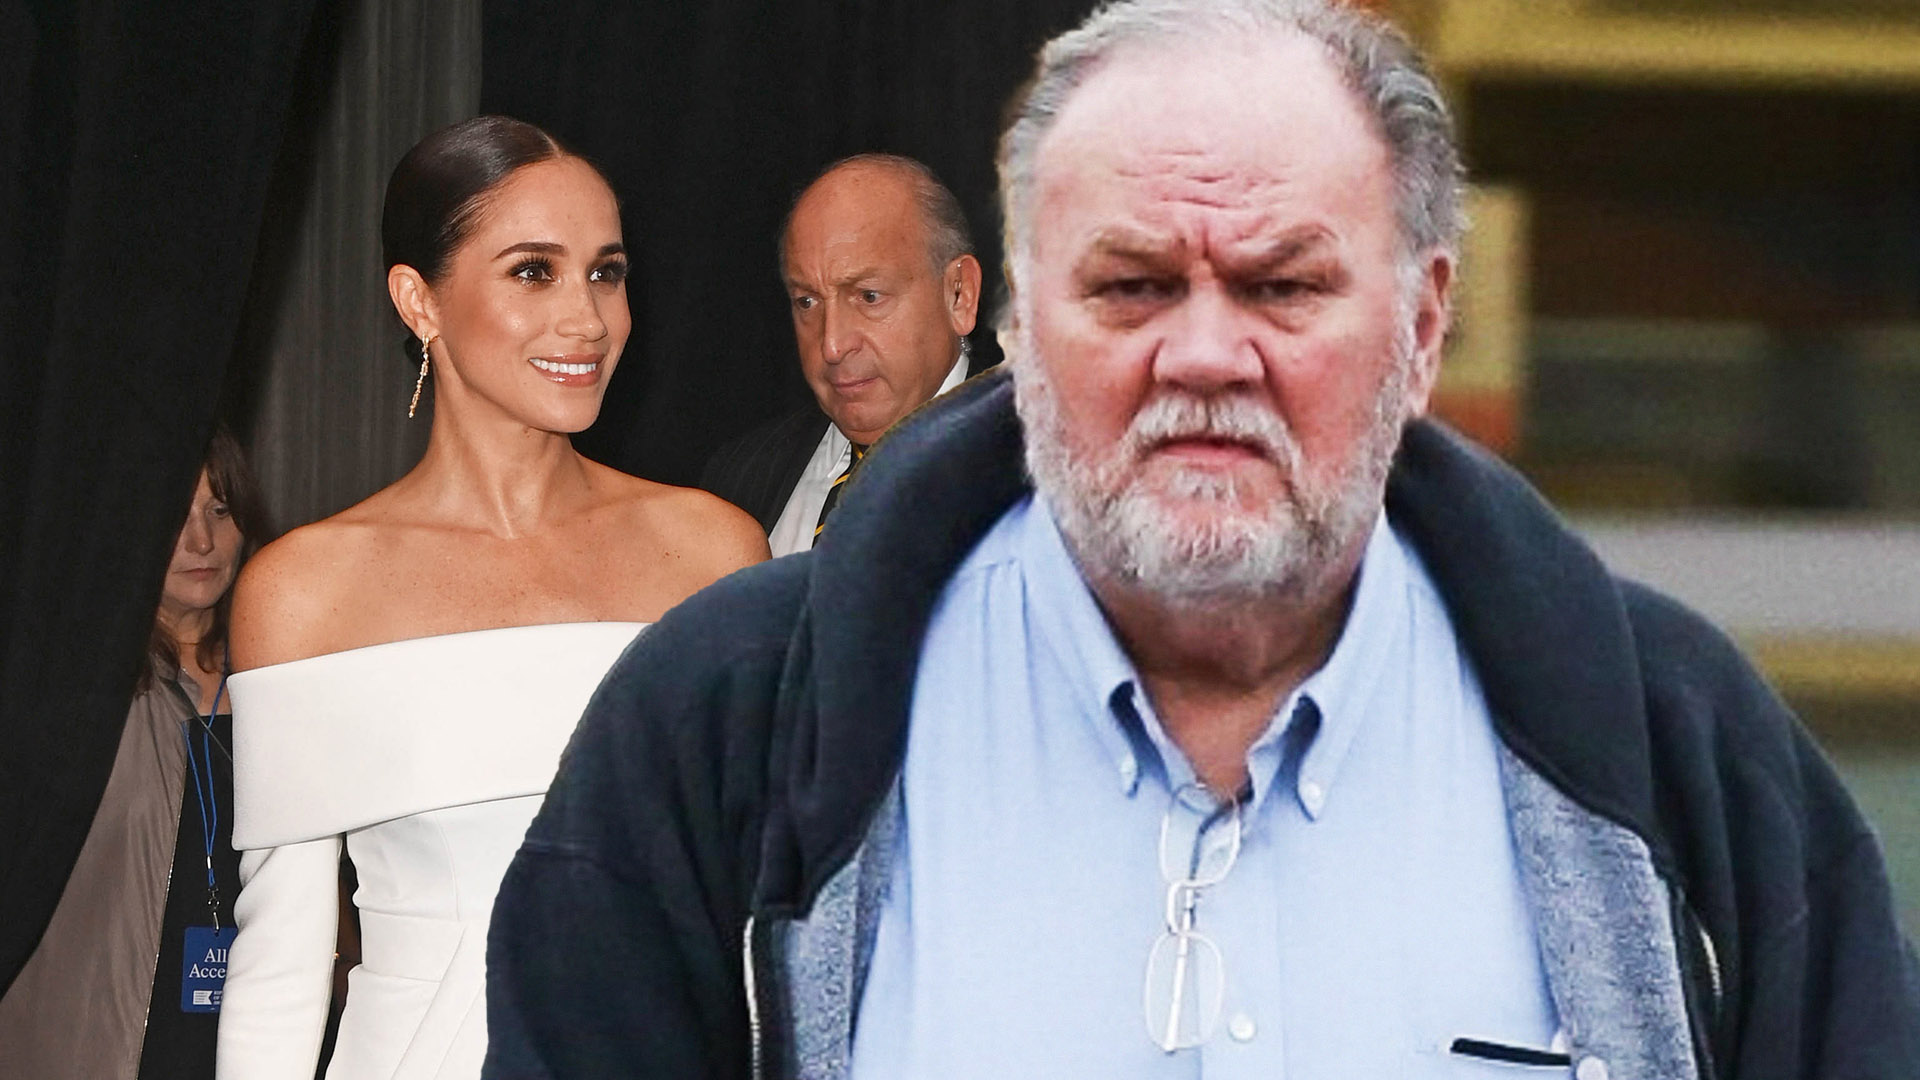 Thomas Markle Hasn't Lost Hope for Reconciliation With Meghan Yet